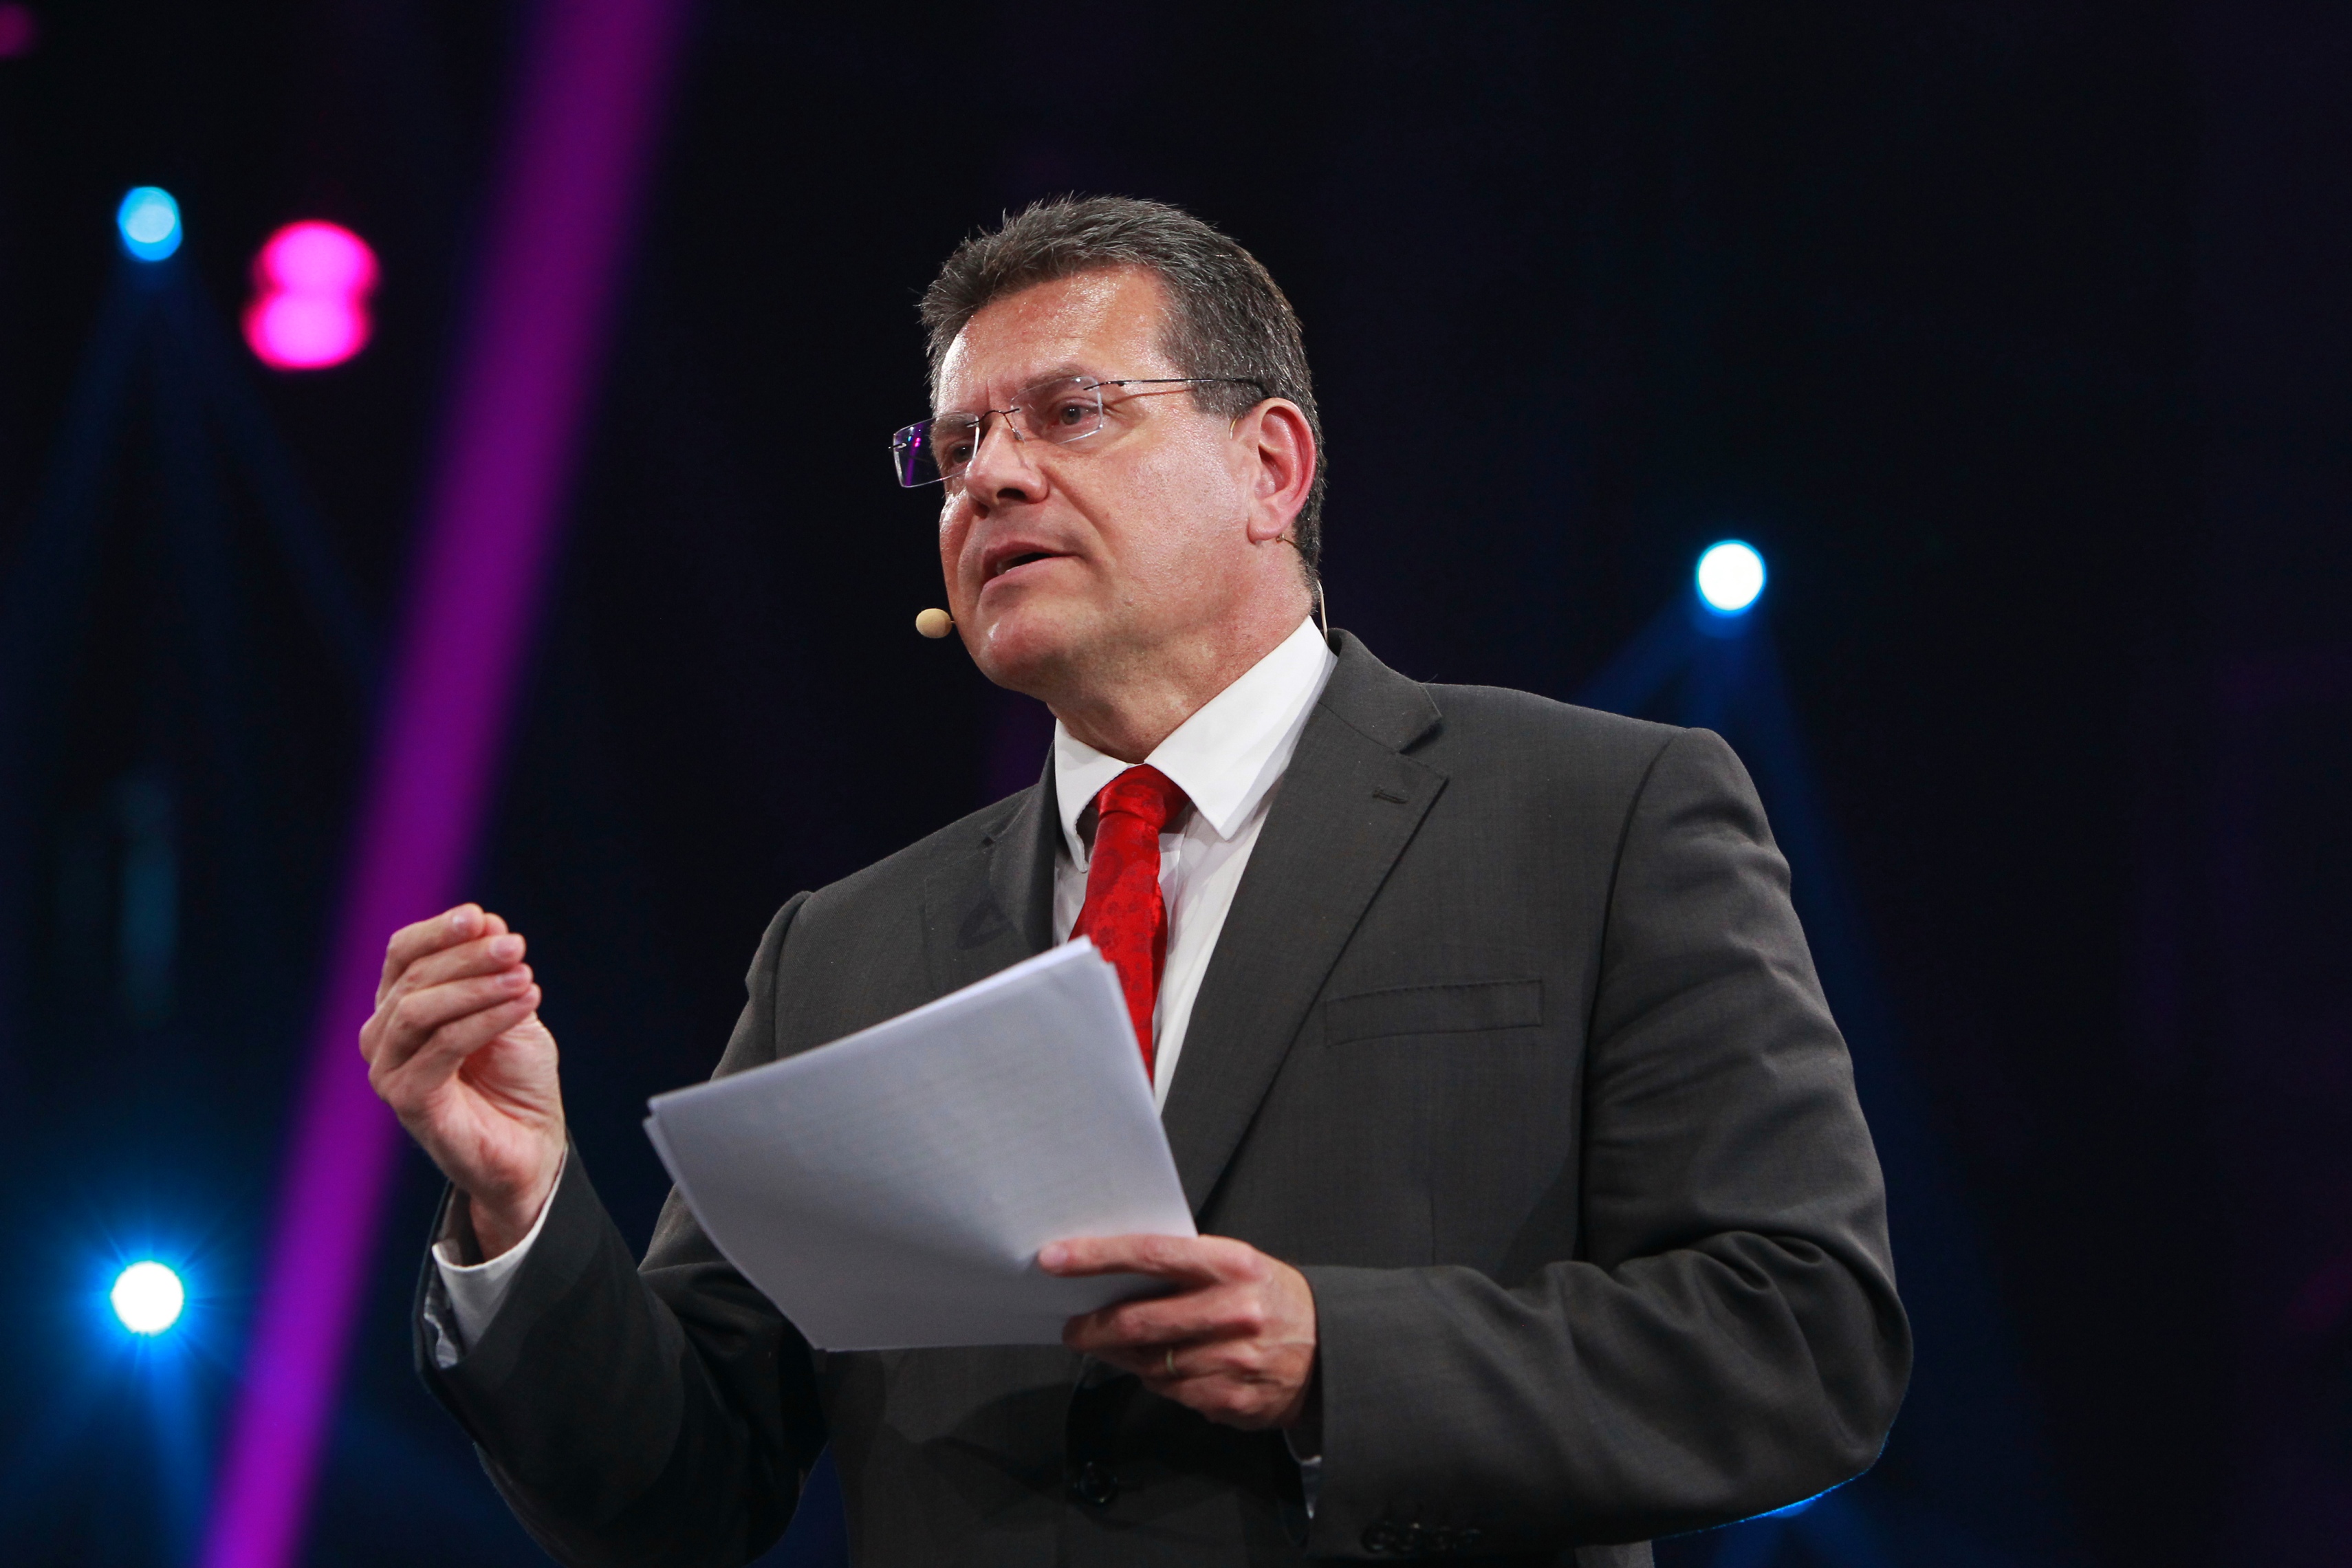 European Commission vice-president in charge for energy union and climate Maros Sefcovic